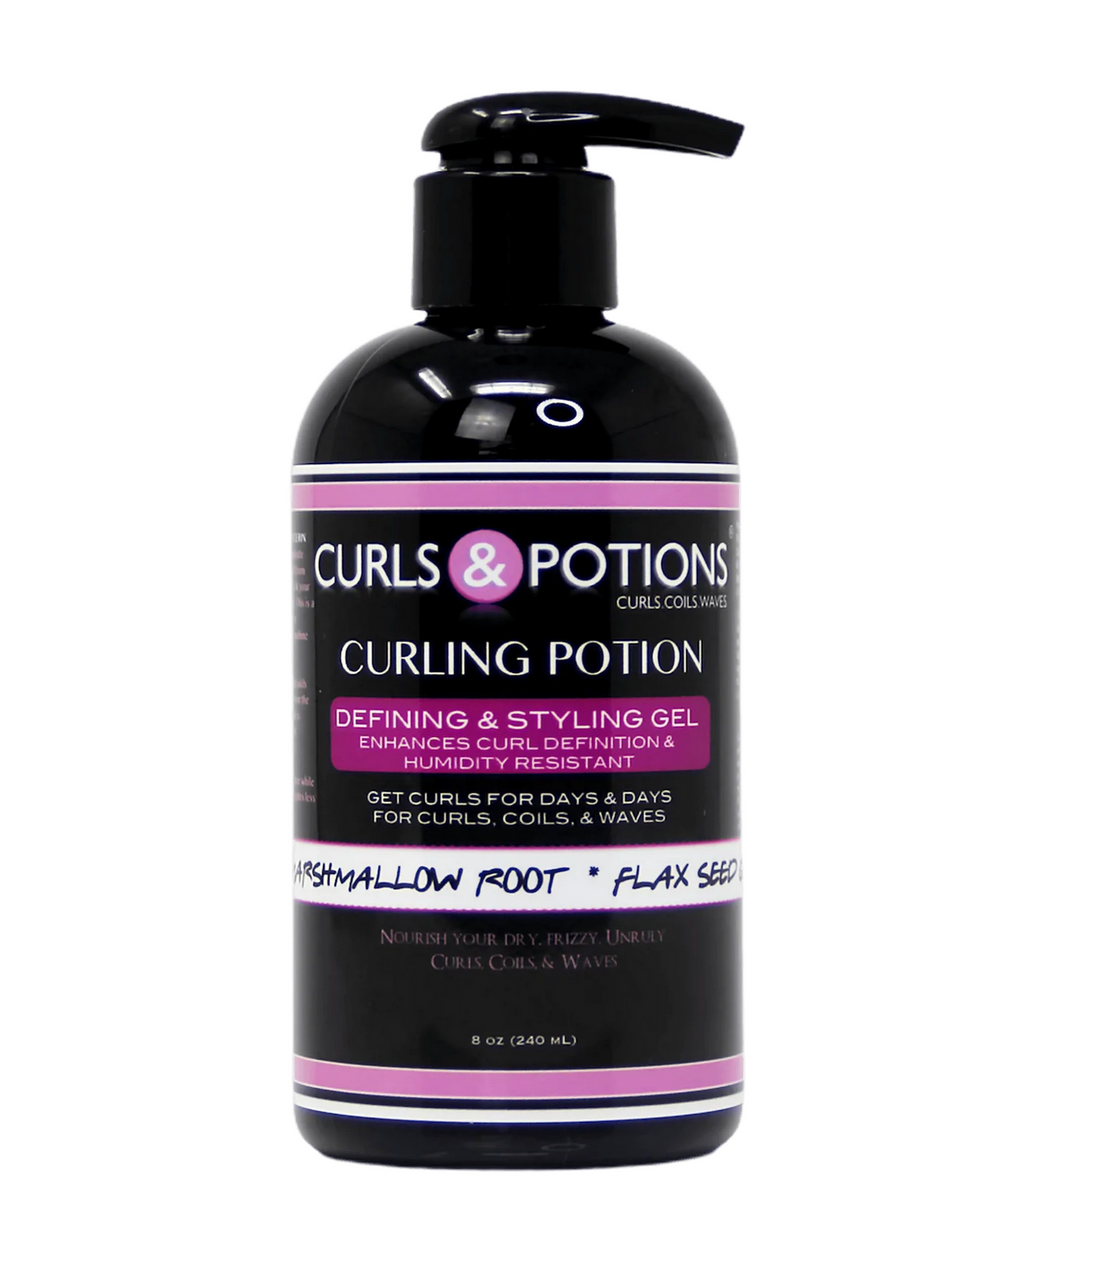 Curls and Potions Curling Potion Styling Gel